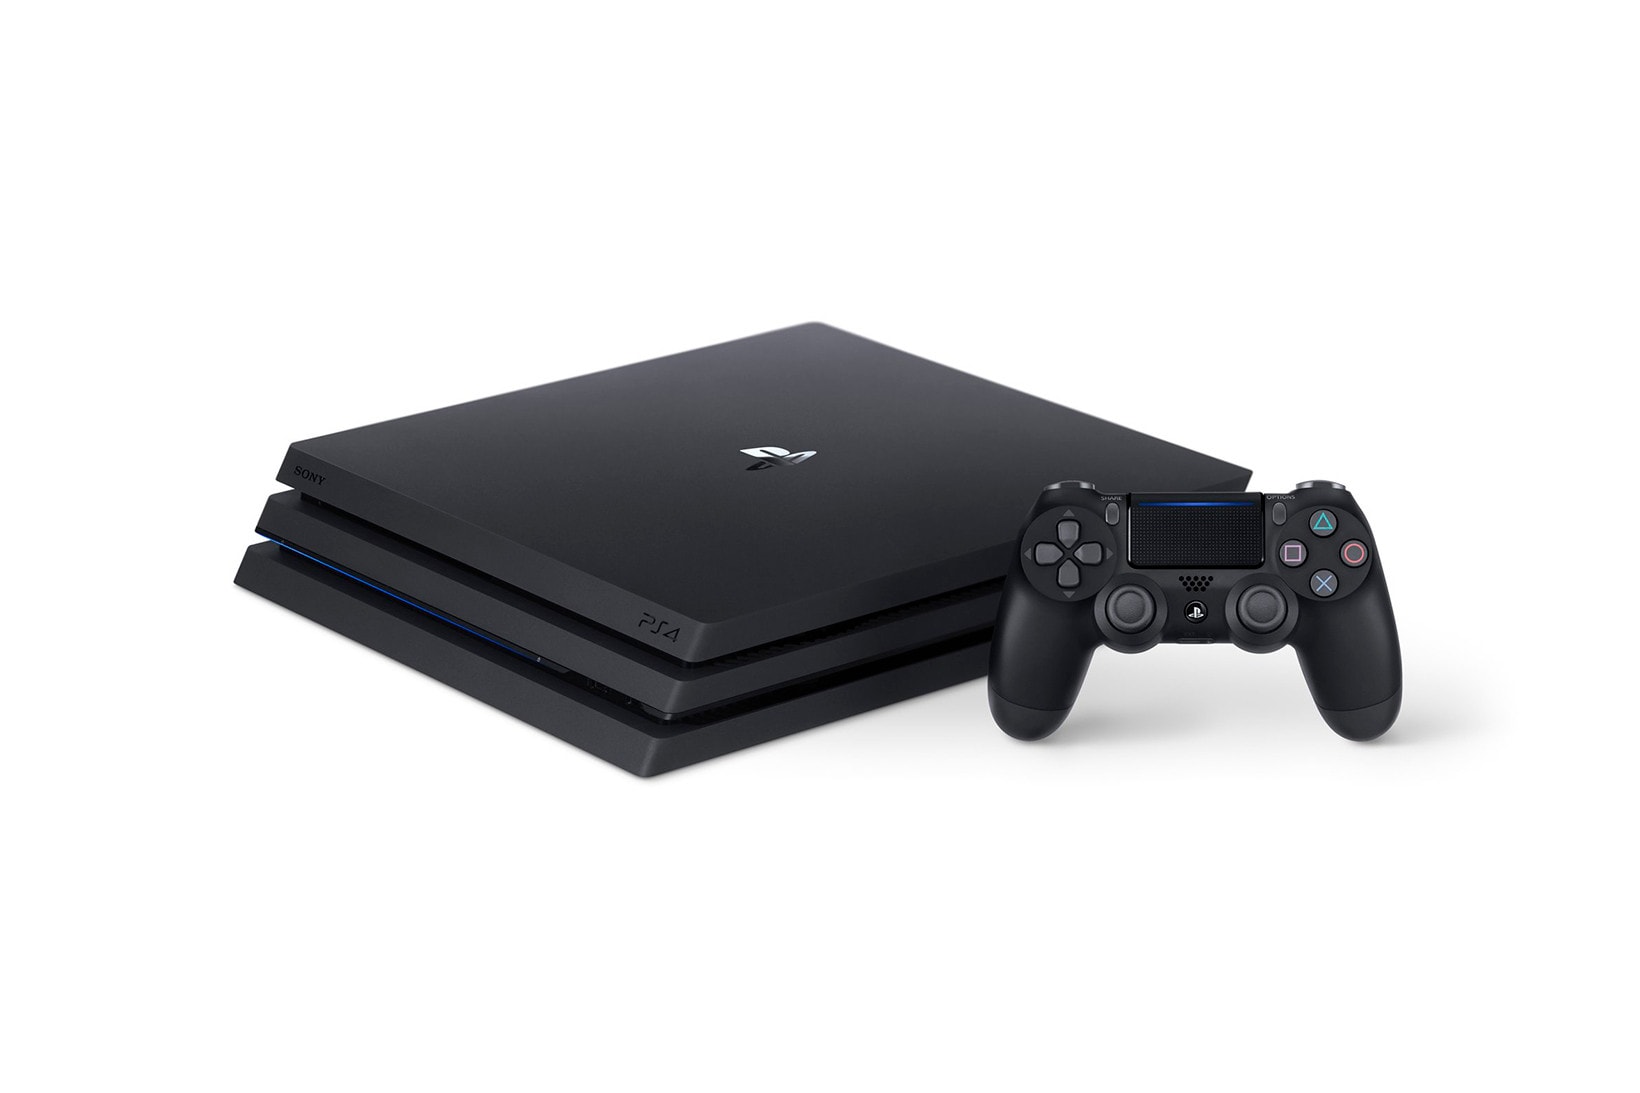 Sony CEO Says Continuing PS4 Support Is 'The Right Thing To Do